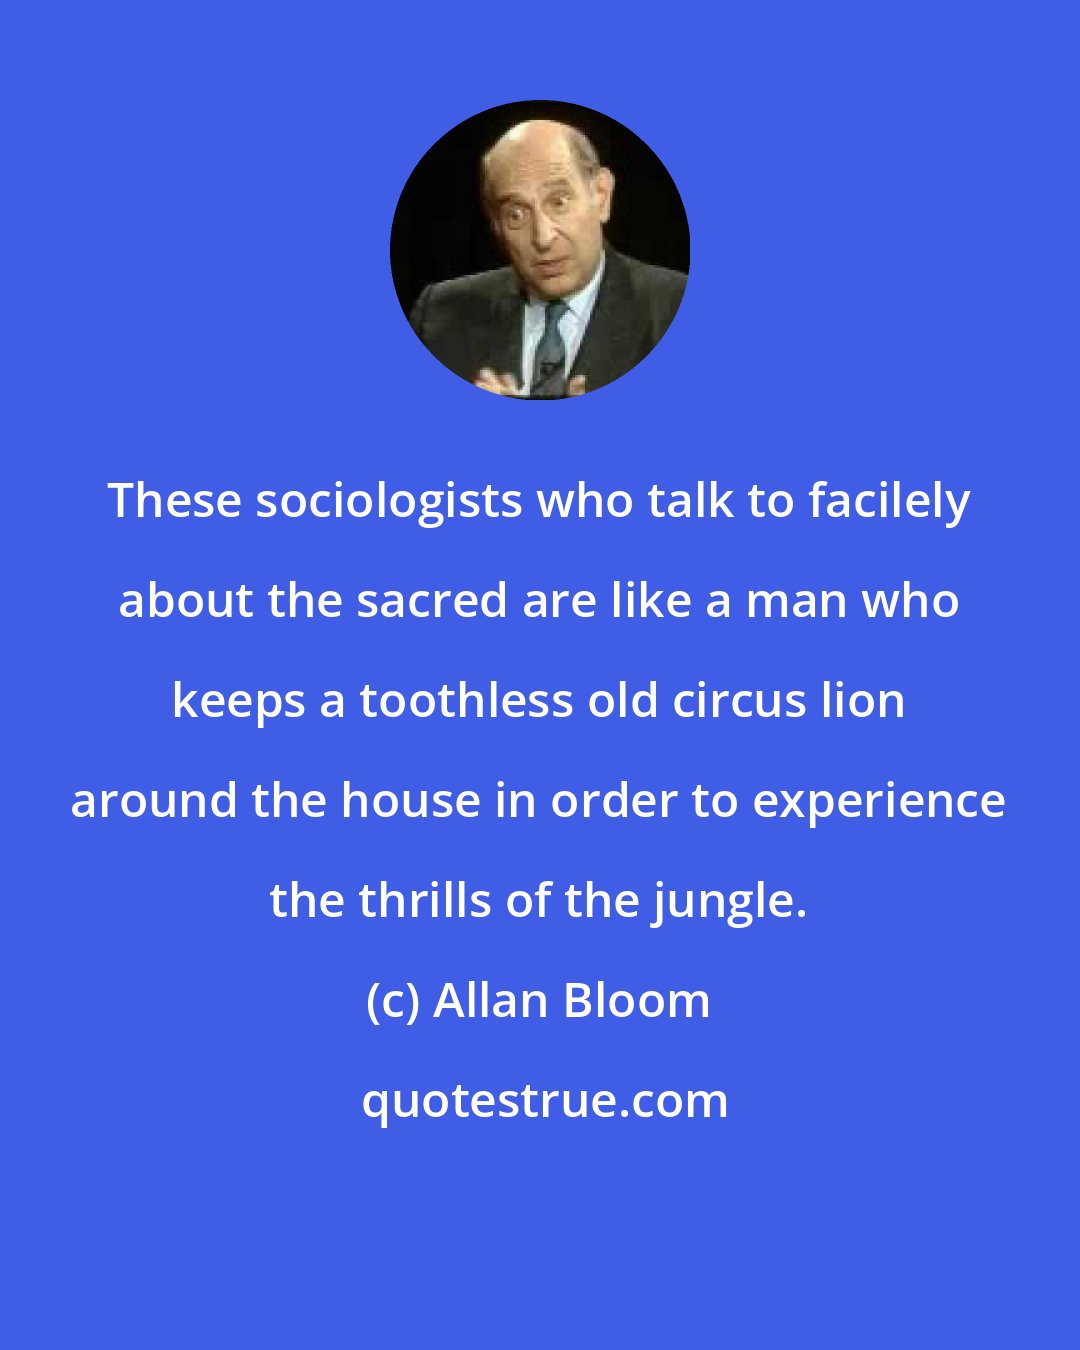 Allan Bloom: These sociologists who talk to facilely about the sacred are like a man who keeps a toothless old circus lion around the house in order to experience the thrills of the jungle.